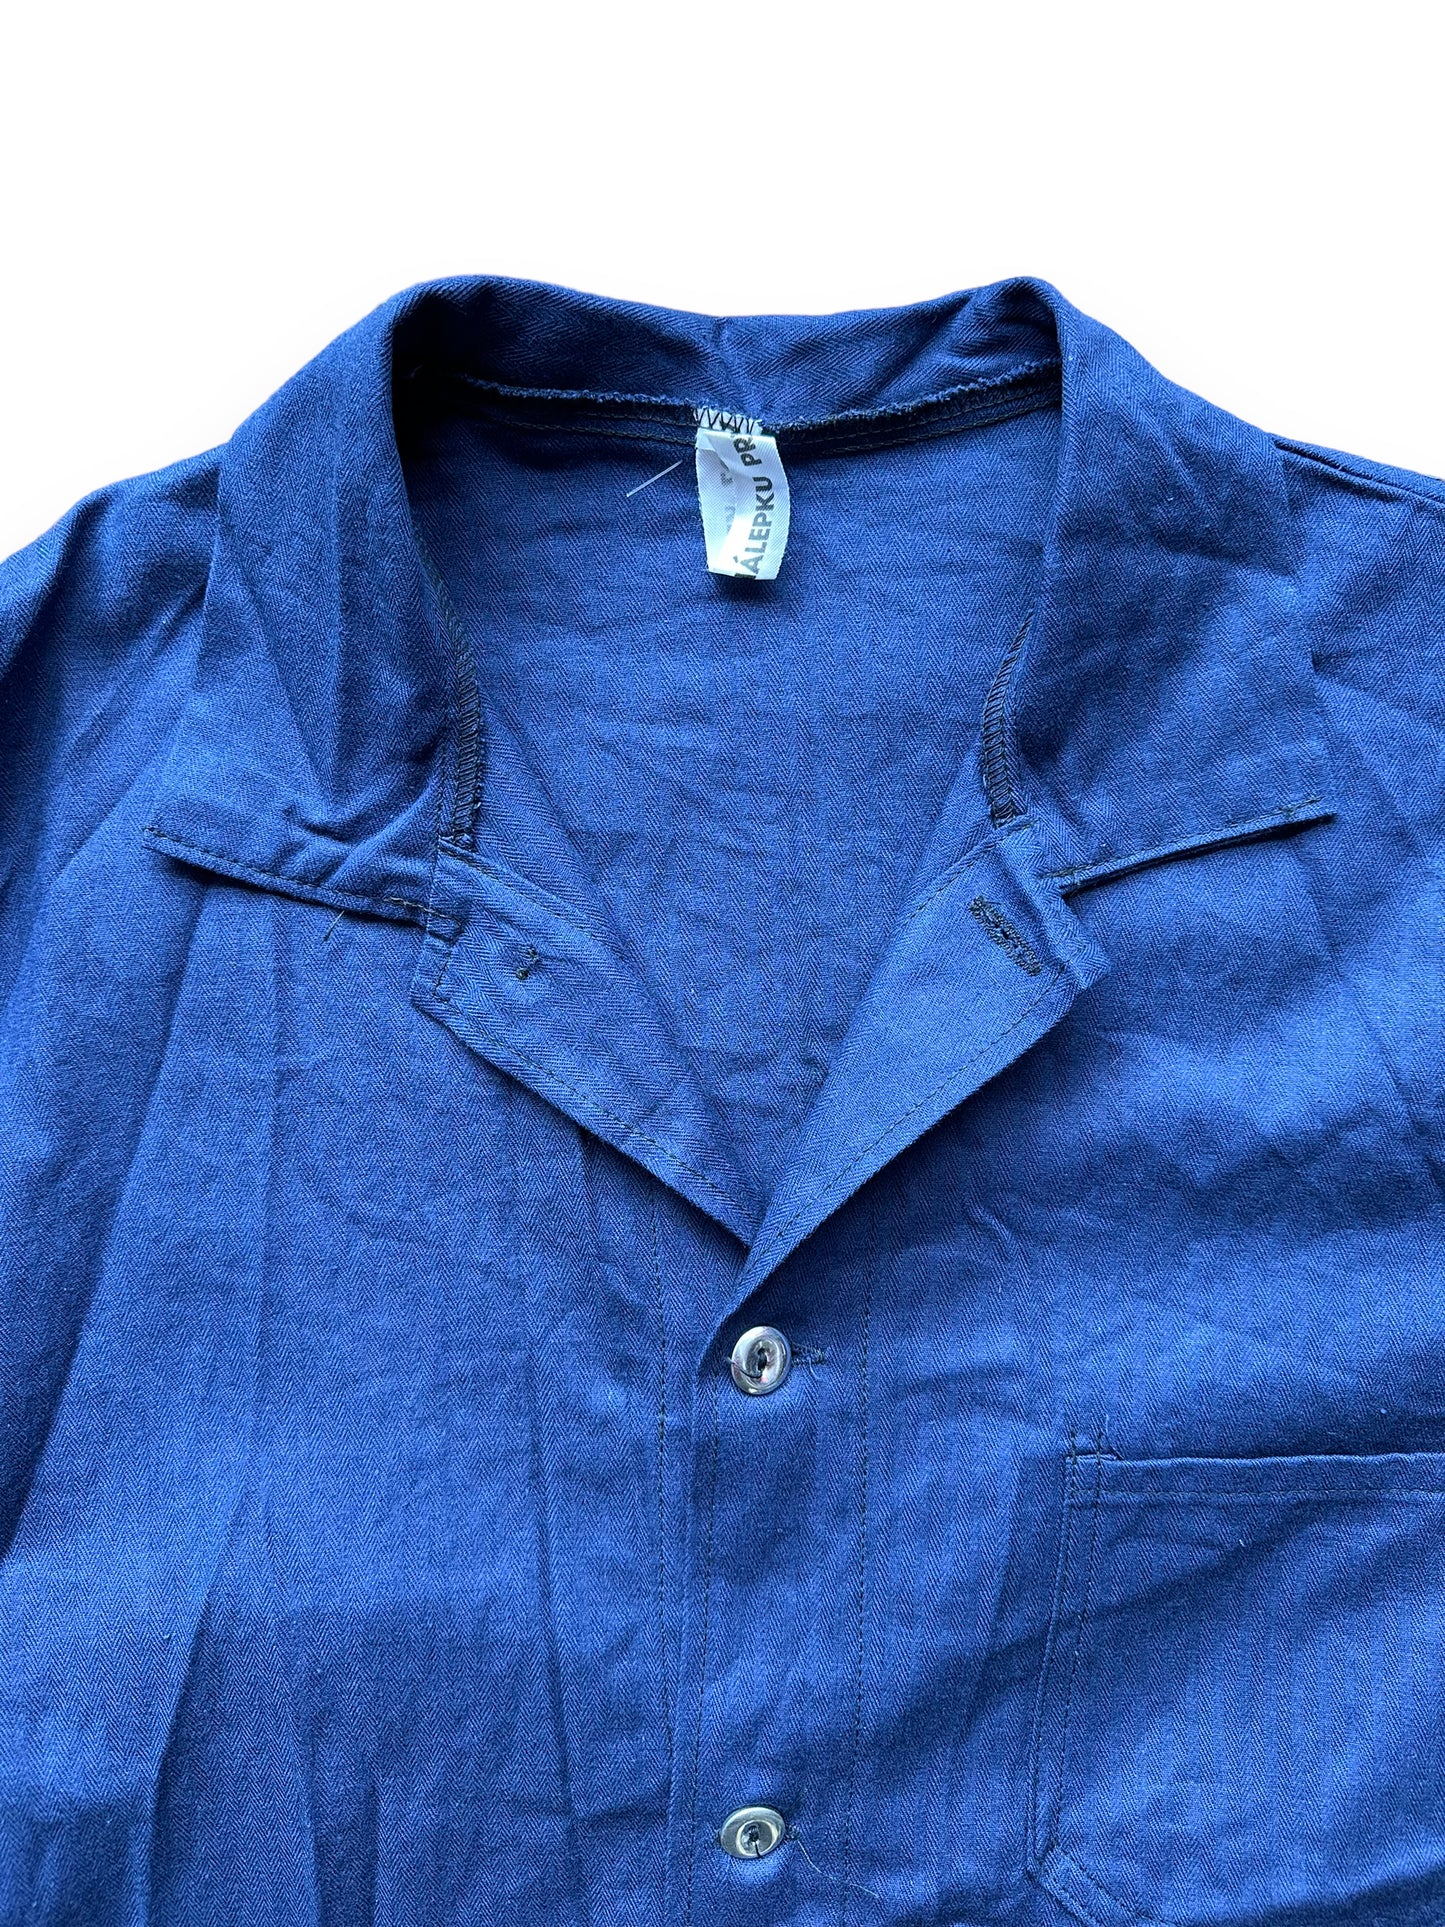 Upper Front View of Vintage Light Cotton European Workwear Shirt SZ M | Vintage European Workwear Seattle | Barn Owl Vintage Goods Seattle